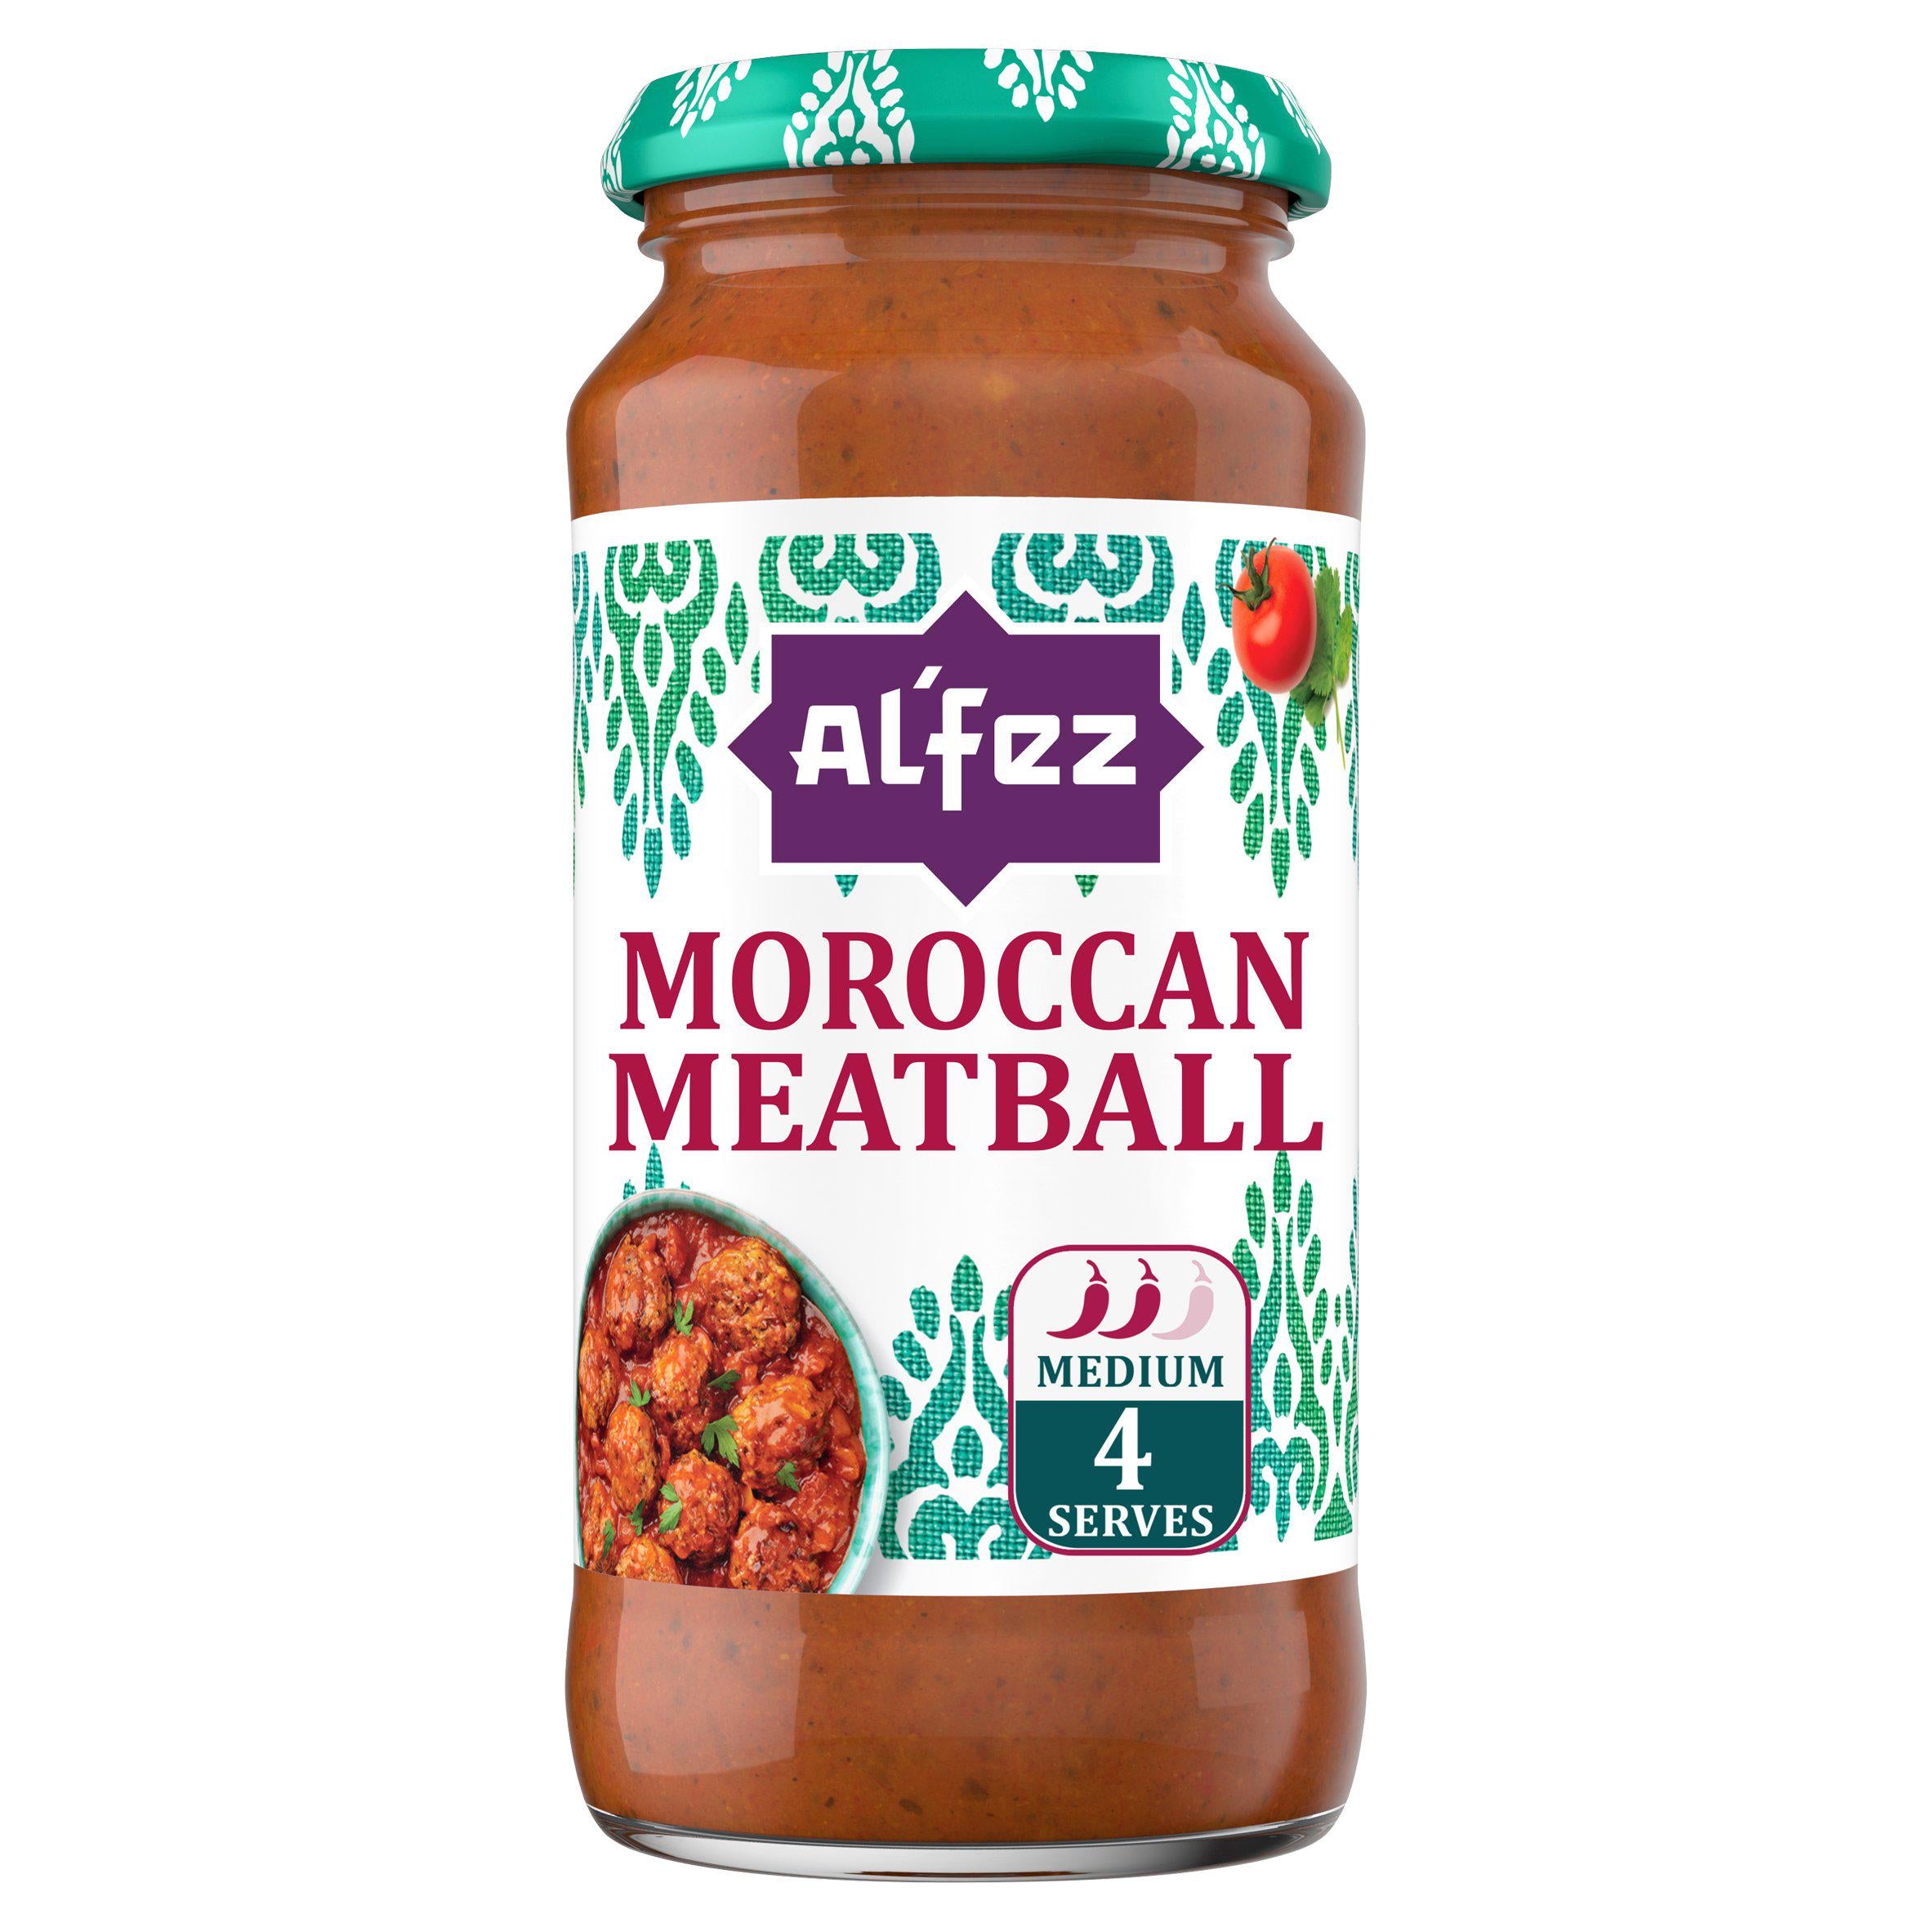 WSO - Al'Fez Moroccan Middle Eastern Meatball Sauce 6X450g